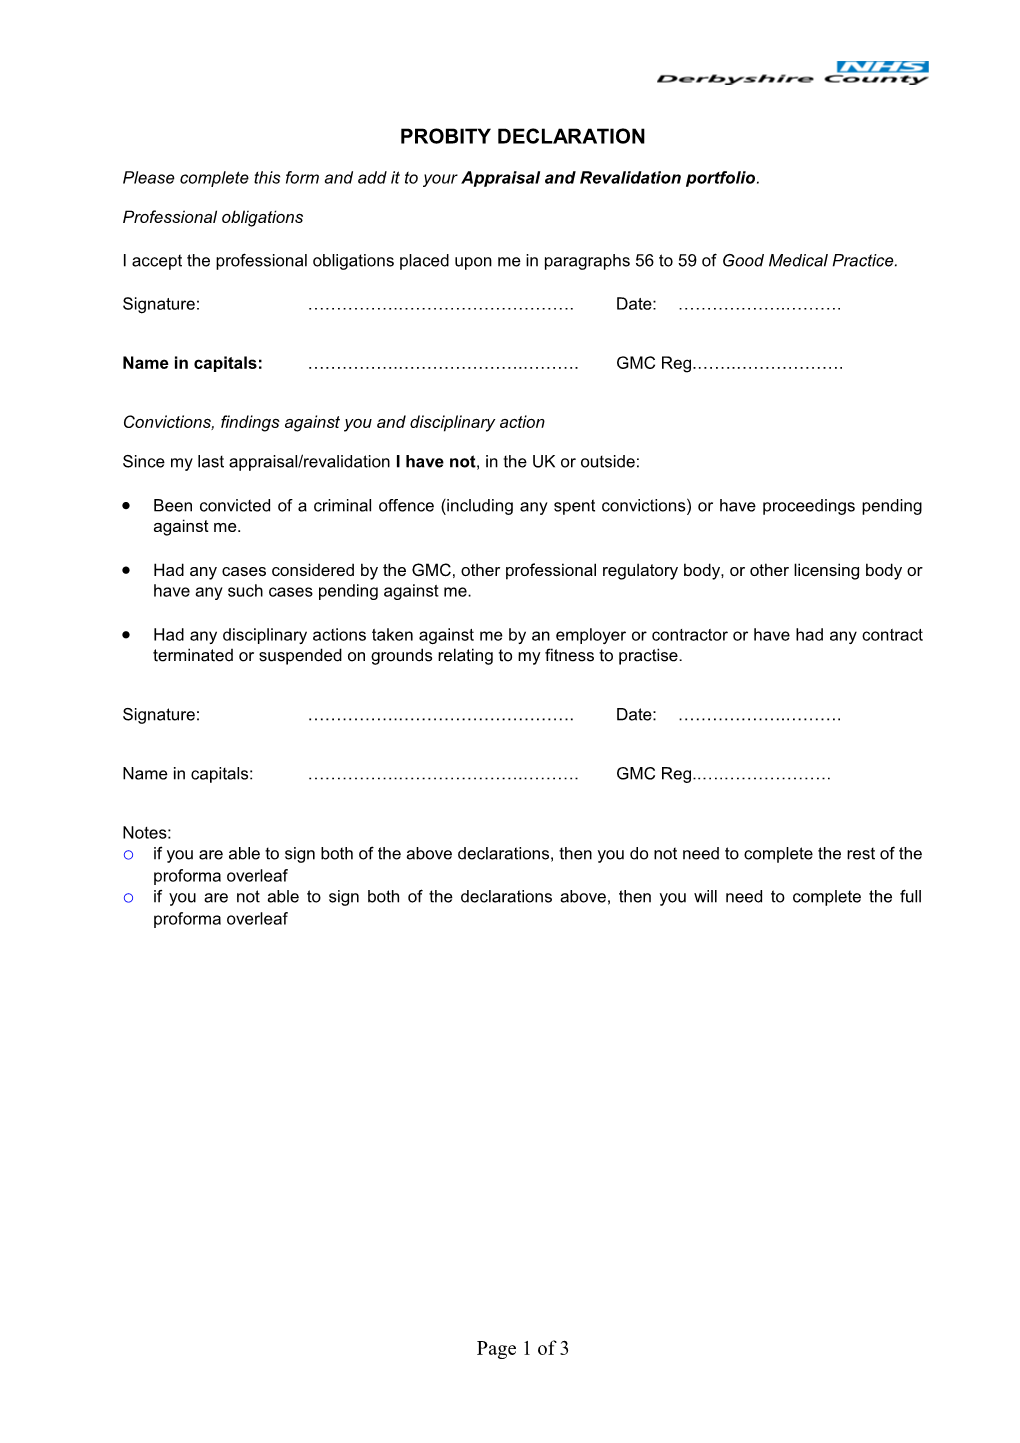 Please Complete This Form and Add It to Your Appraisal and Revalidation Portfolio